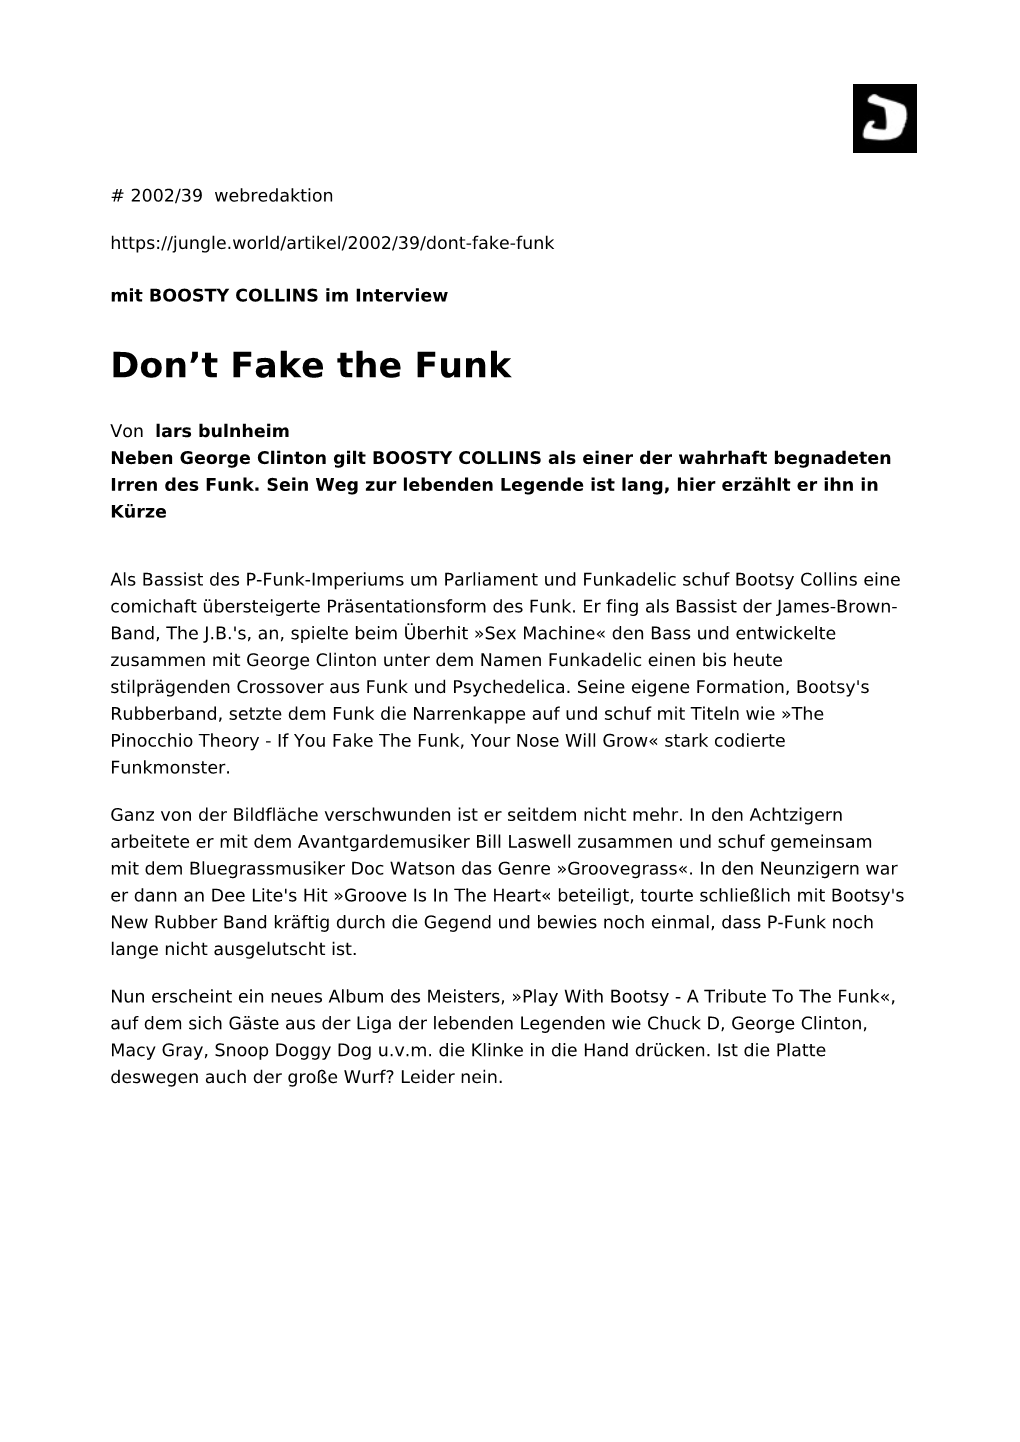 Don't Fake the Funk